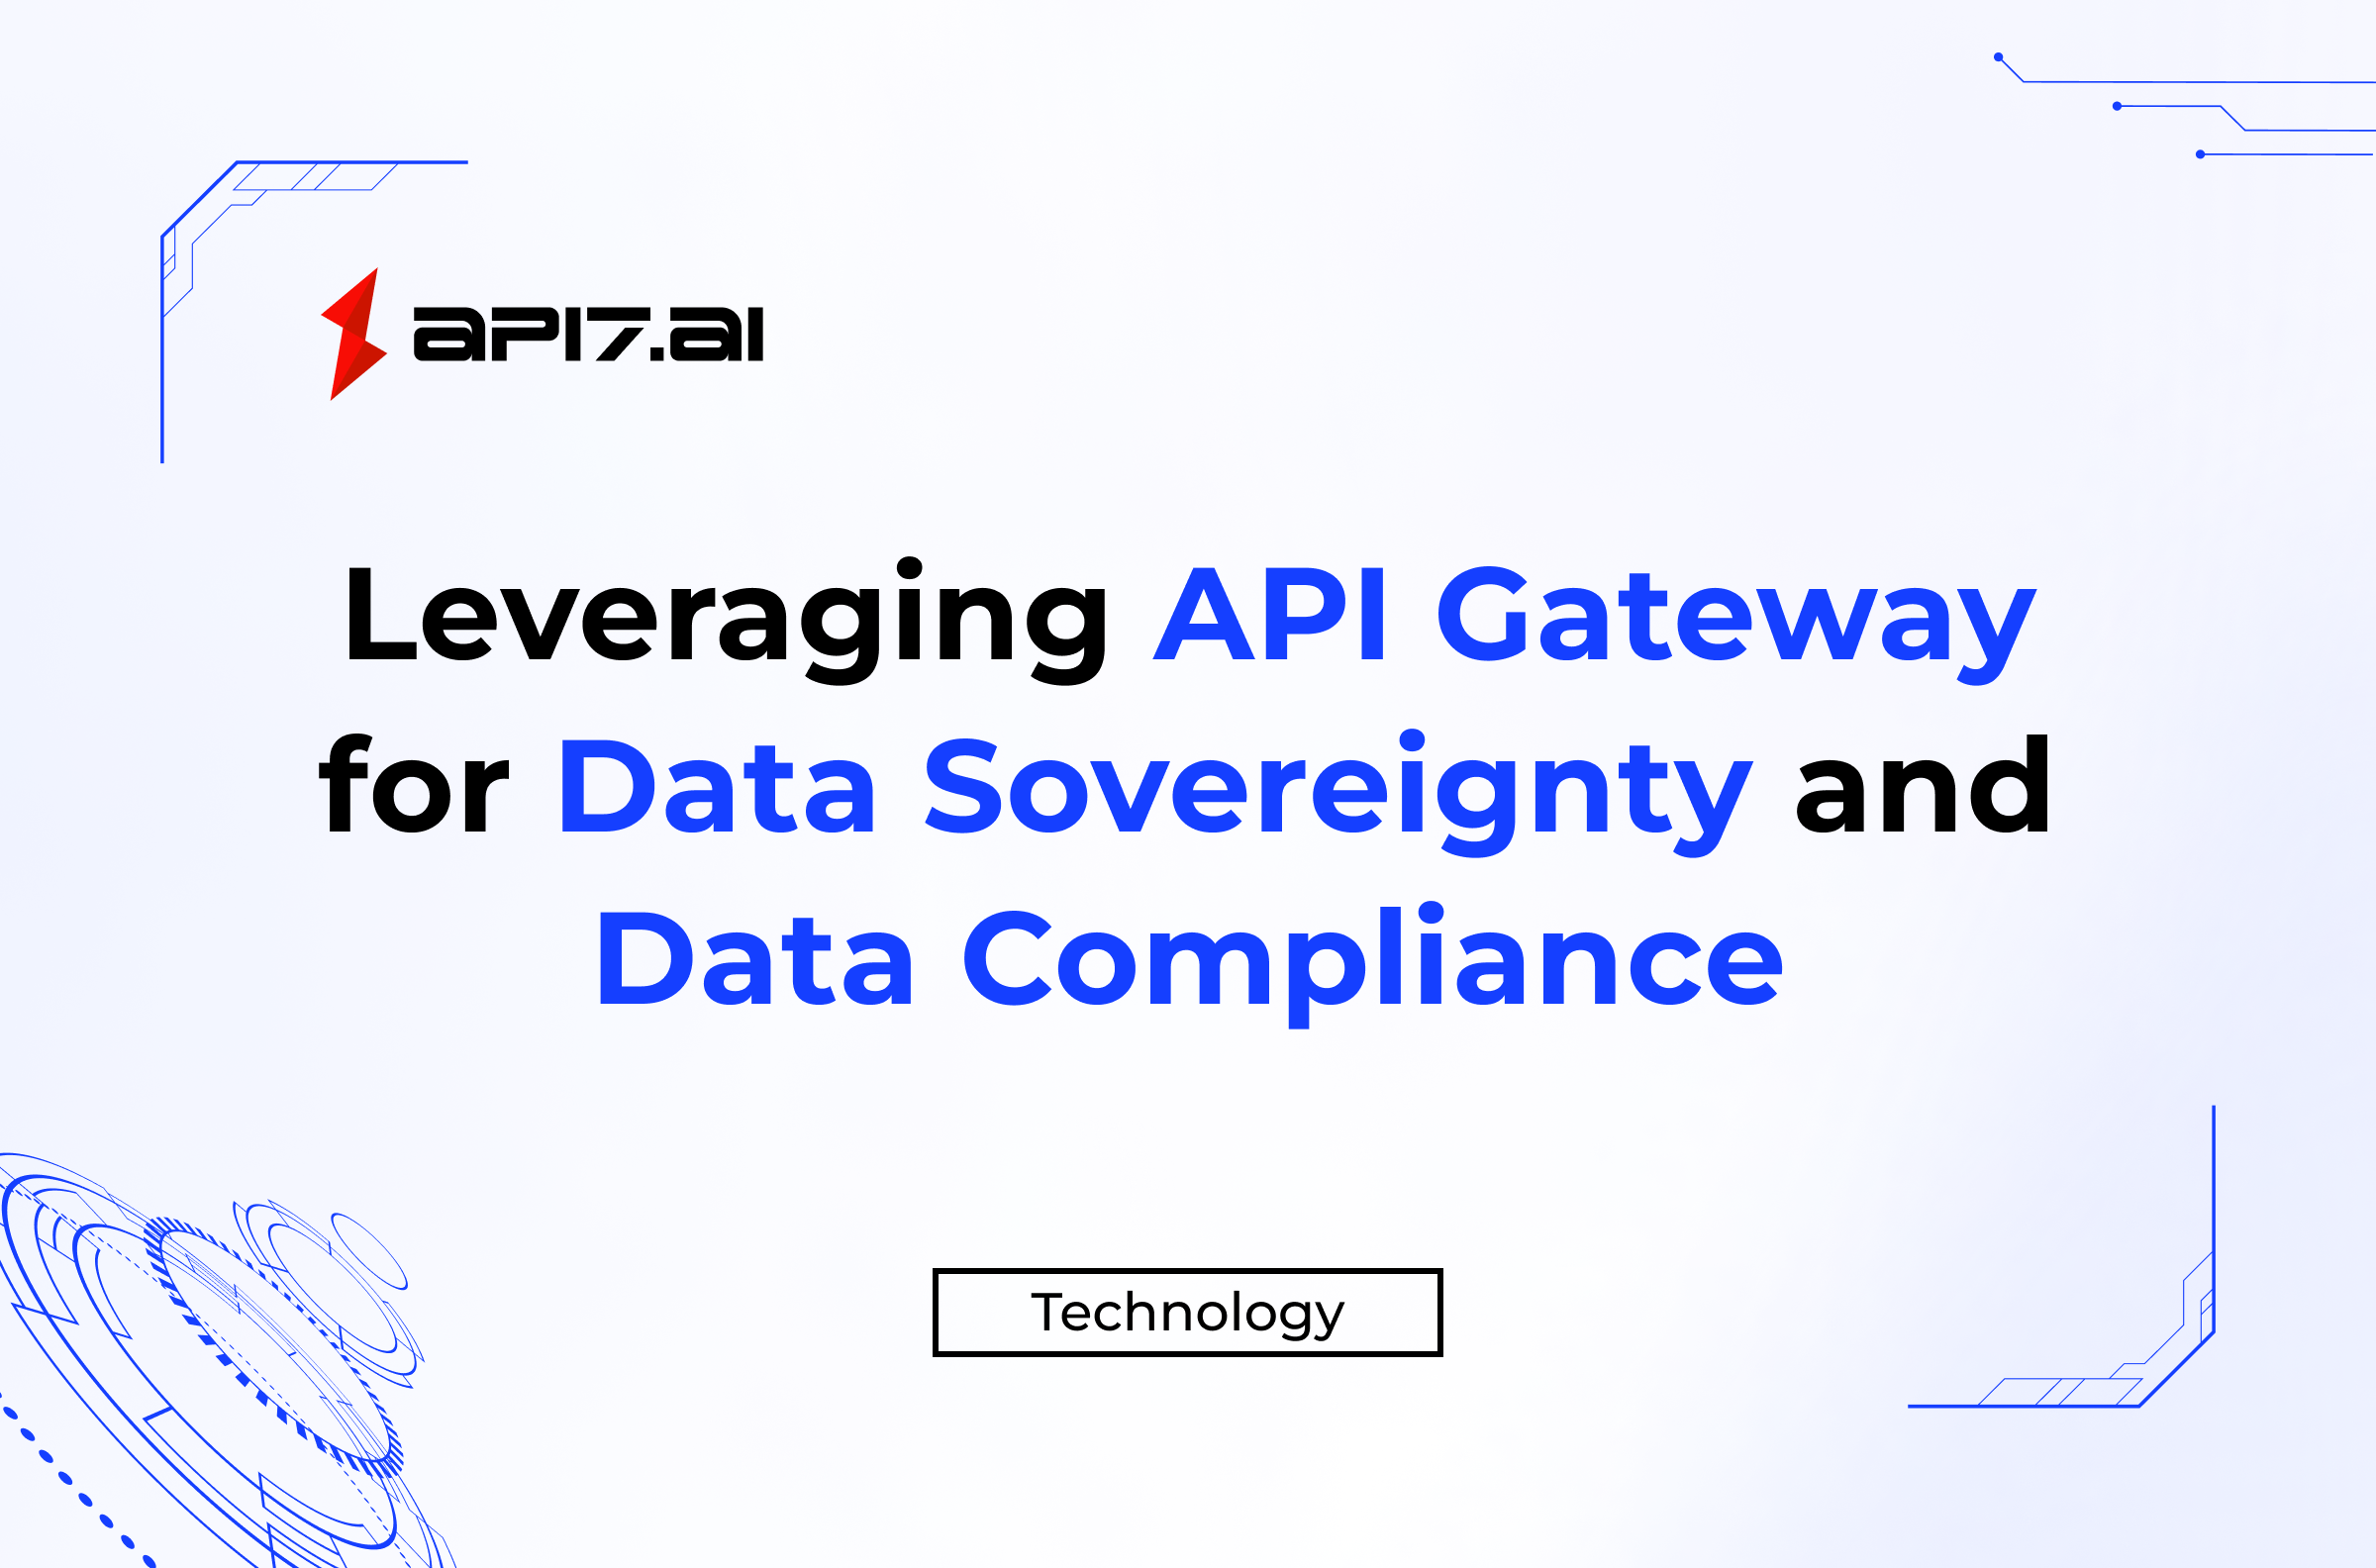 Leveraging API Gateway for Data Sovereignty and Data Compliance